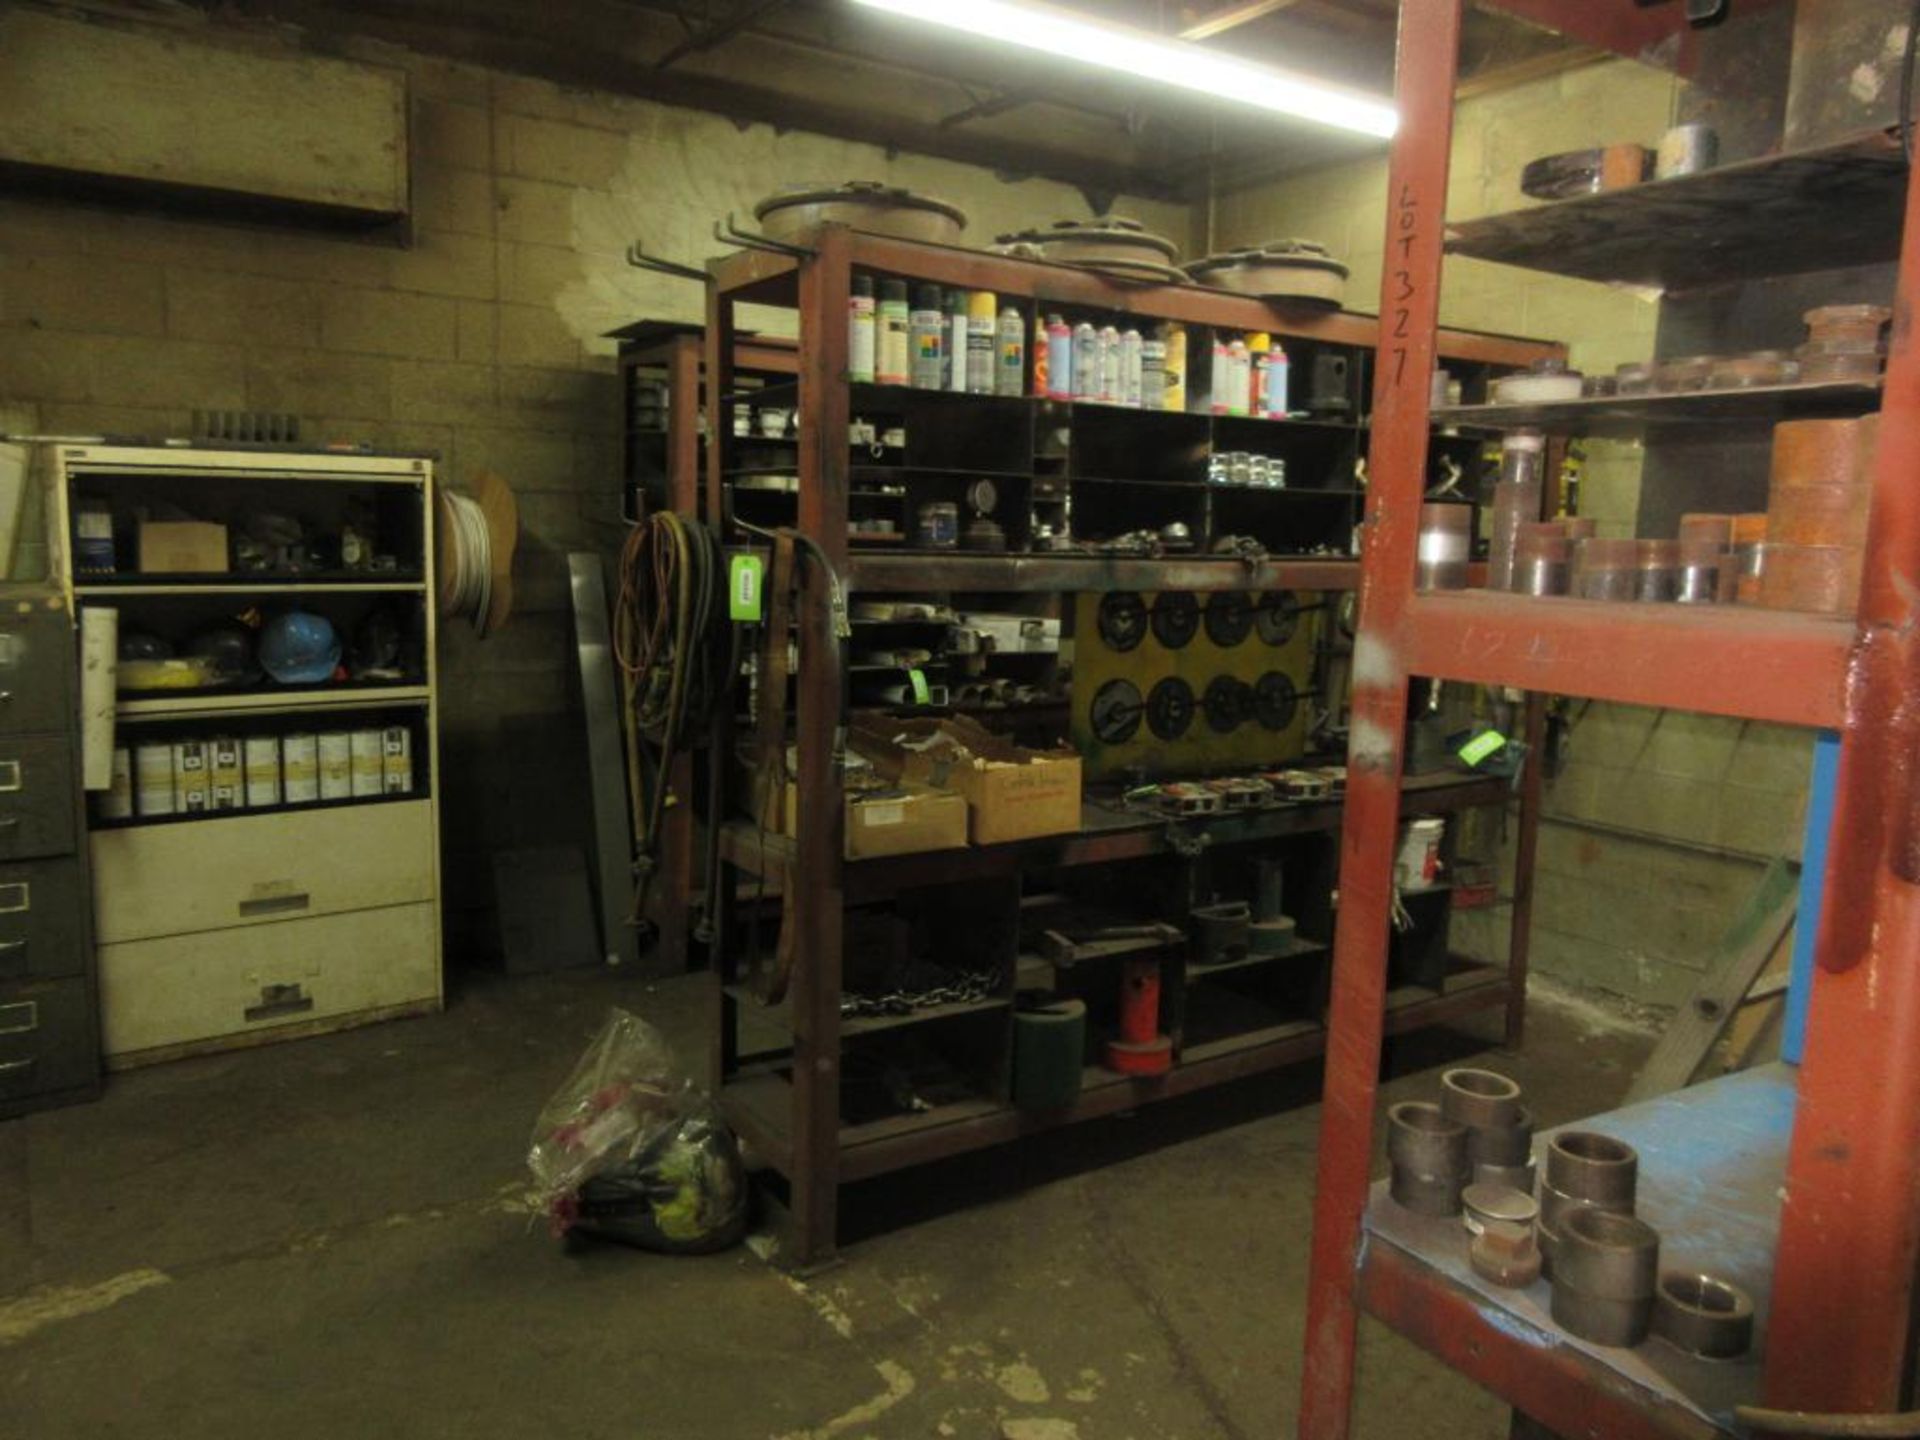 CONTENTS OF WEST TOOL ROOM EXCLUDING 6 LOTTED ITEMS (124, 125, 127, 127, 155, 156), INCLUDES FASTENE